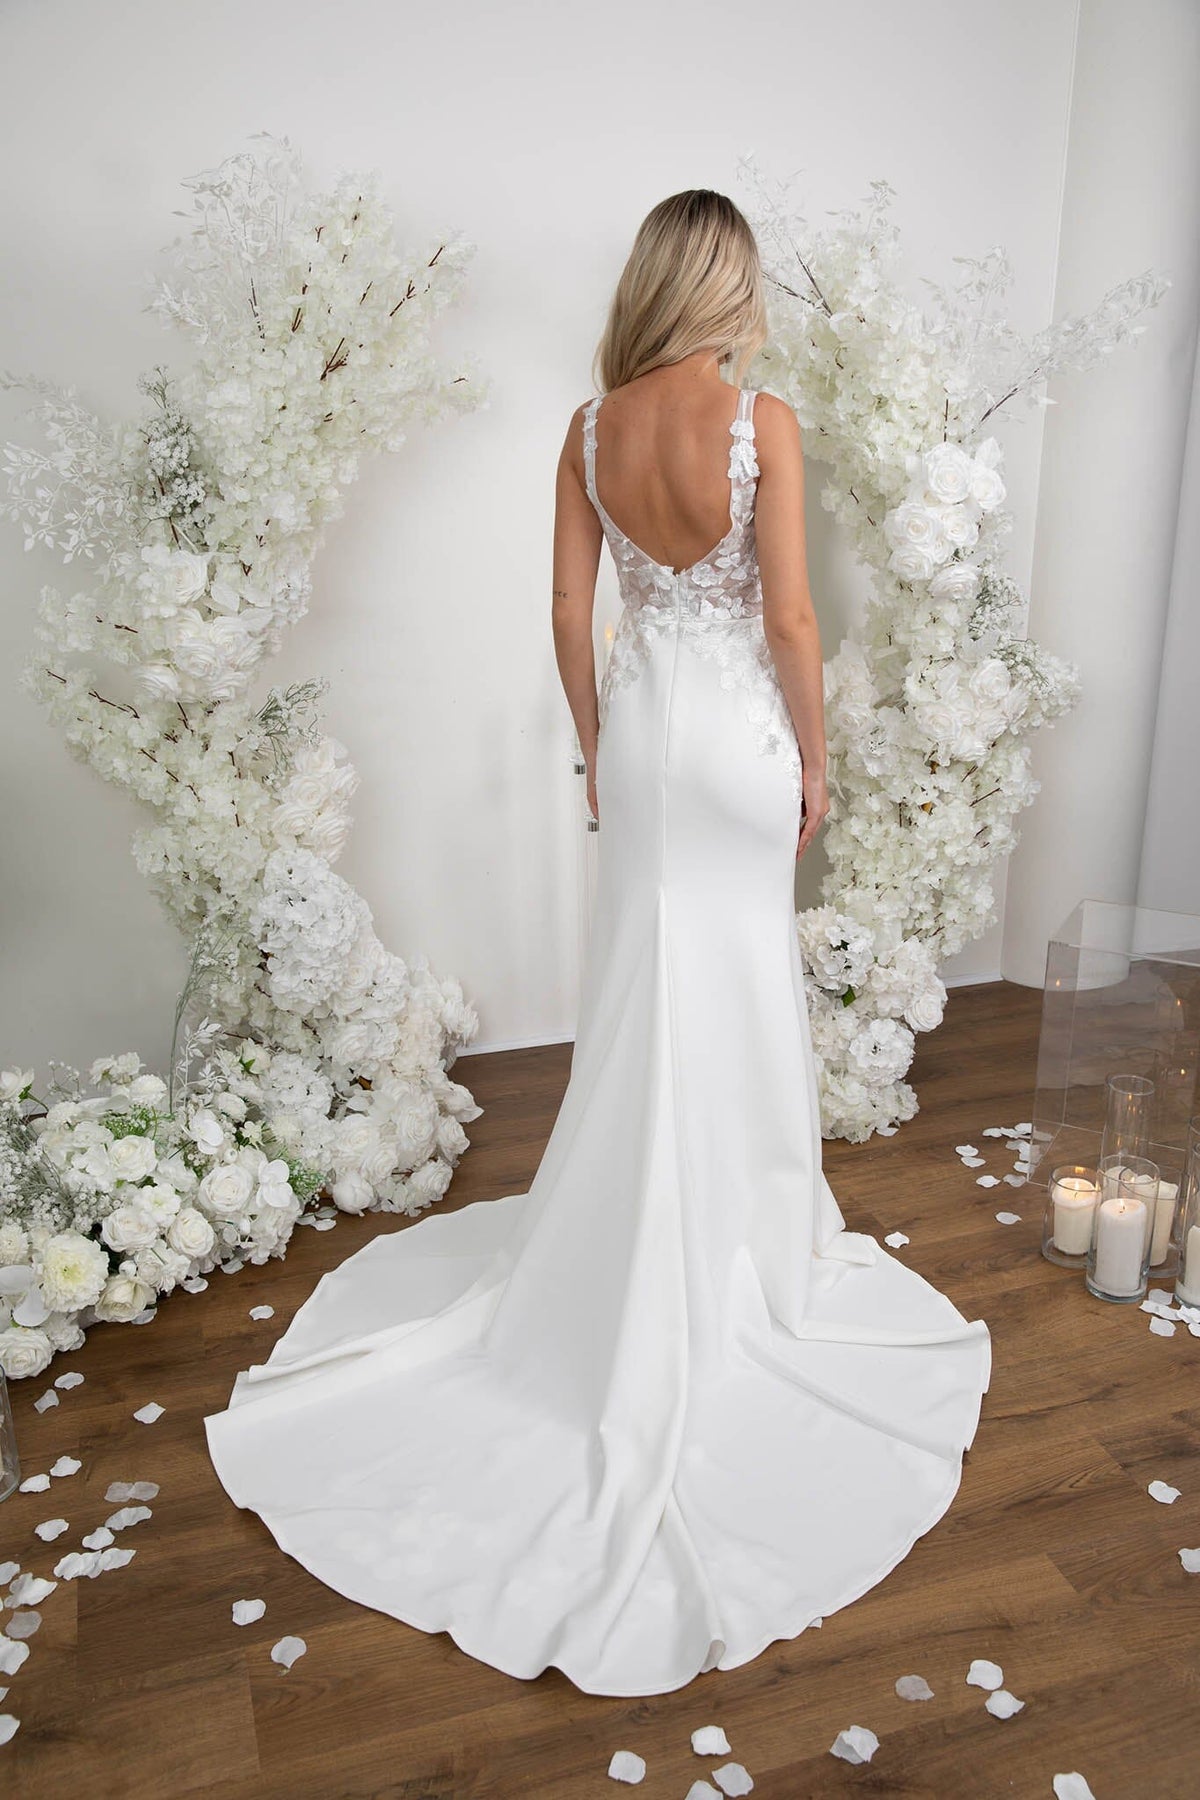 Back Image of Form Fitting Ivory White Wedding Gown with V Neck, Lace Motif Detailing, Open Back and Sweep Train